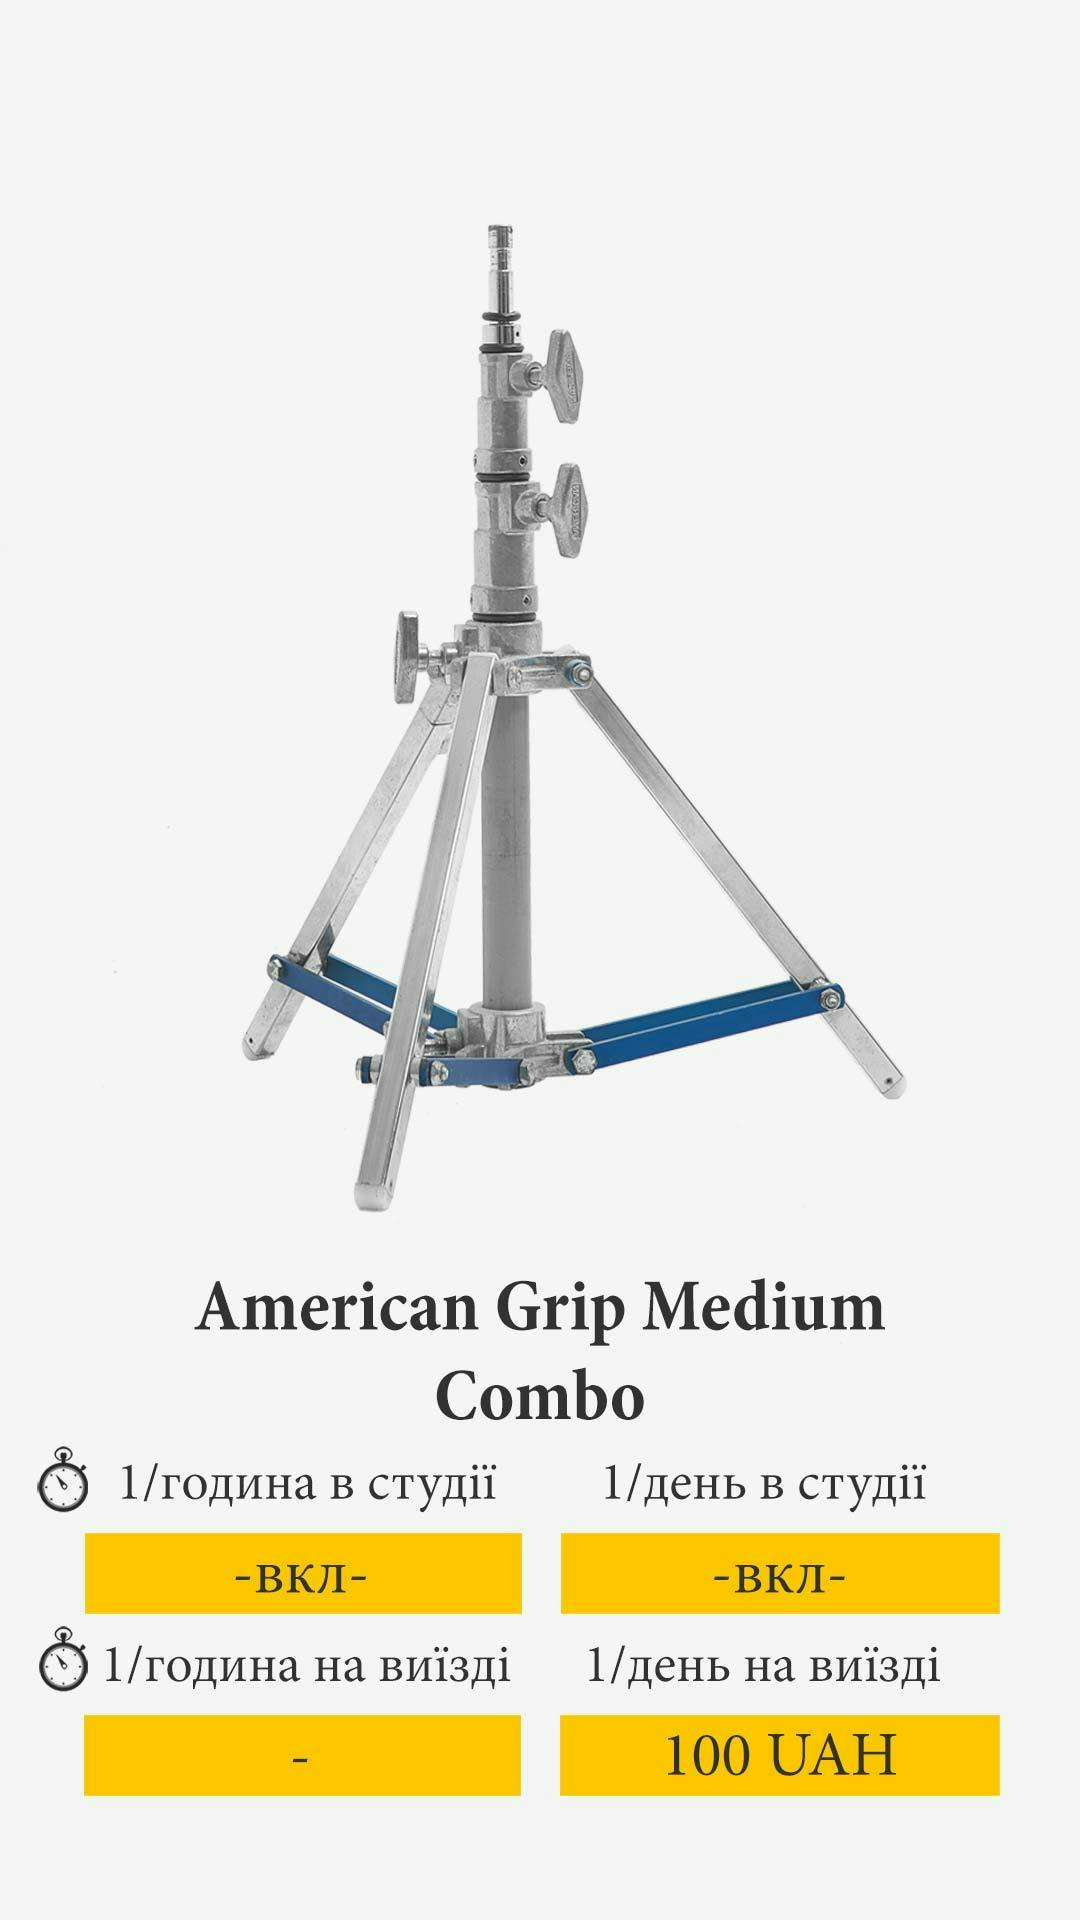 Cover image from american-grip-medium-combo